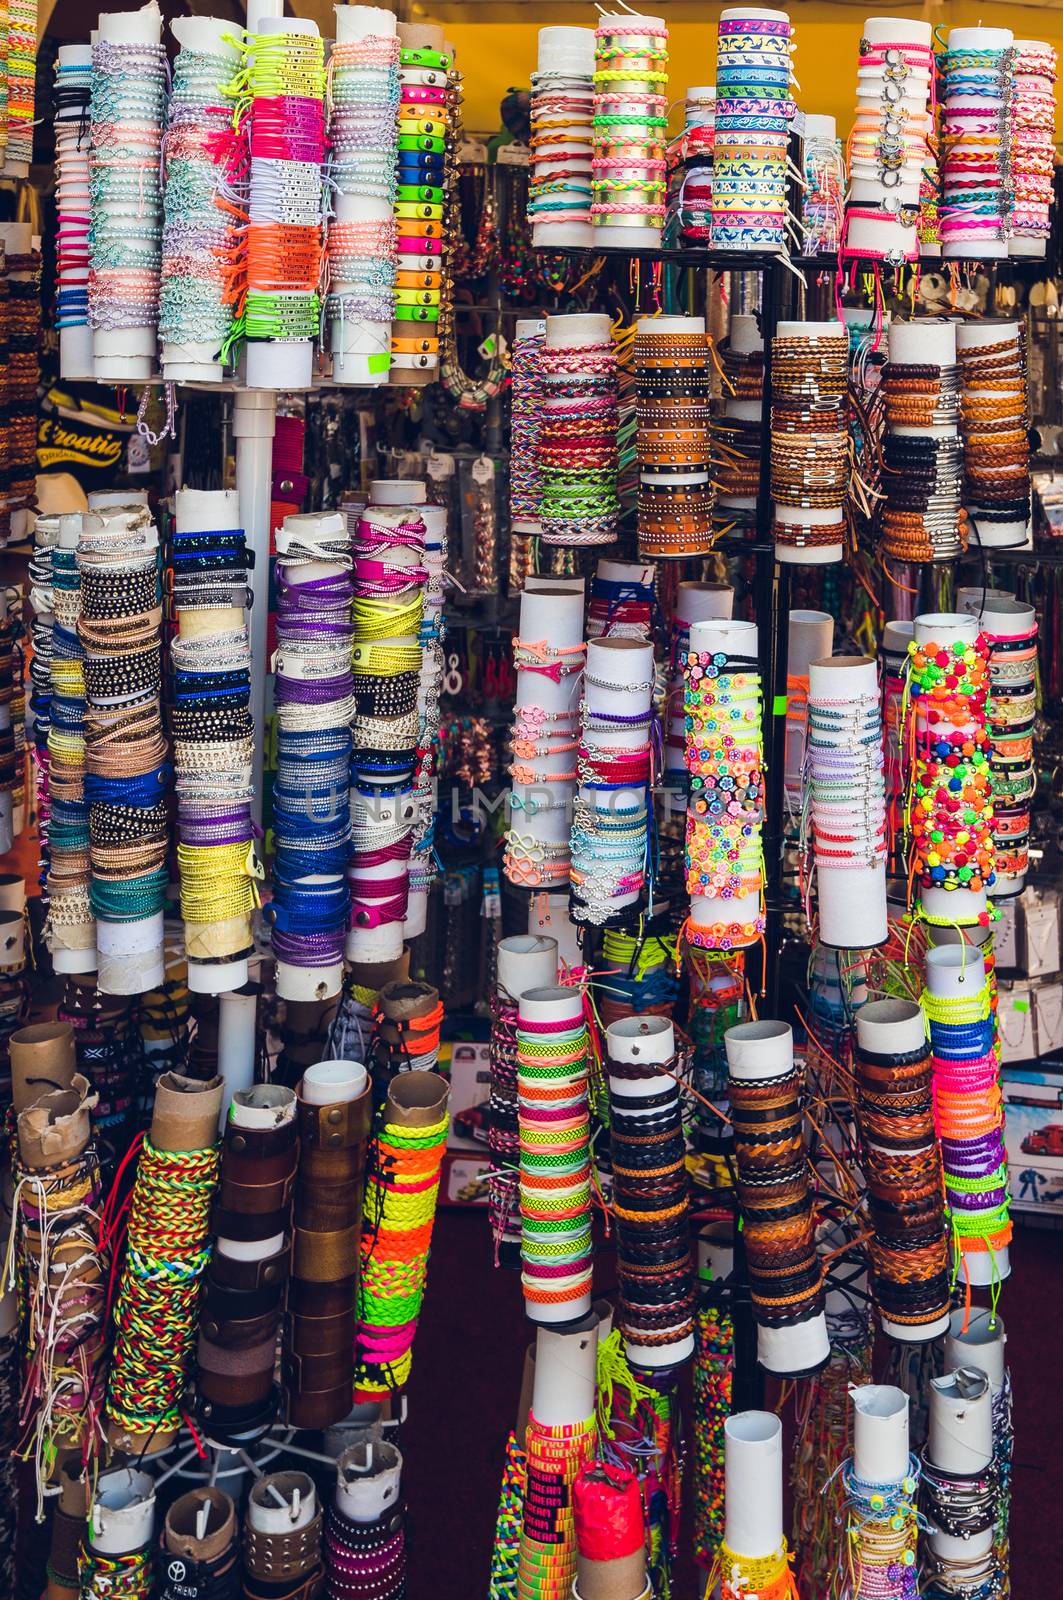 Many Different Colorful Bracelets in the Souvenir Shop on Paper Rolls